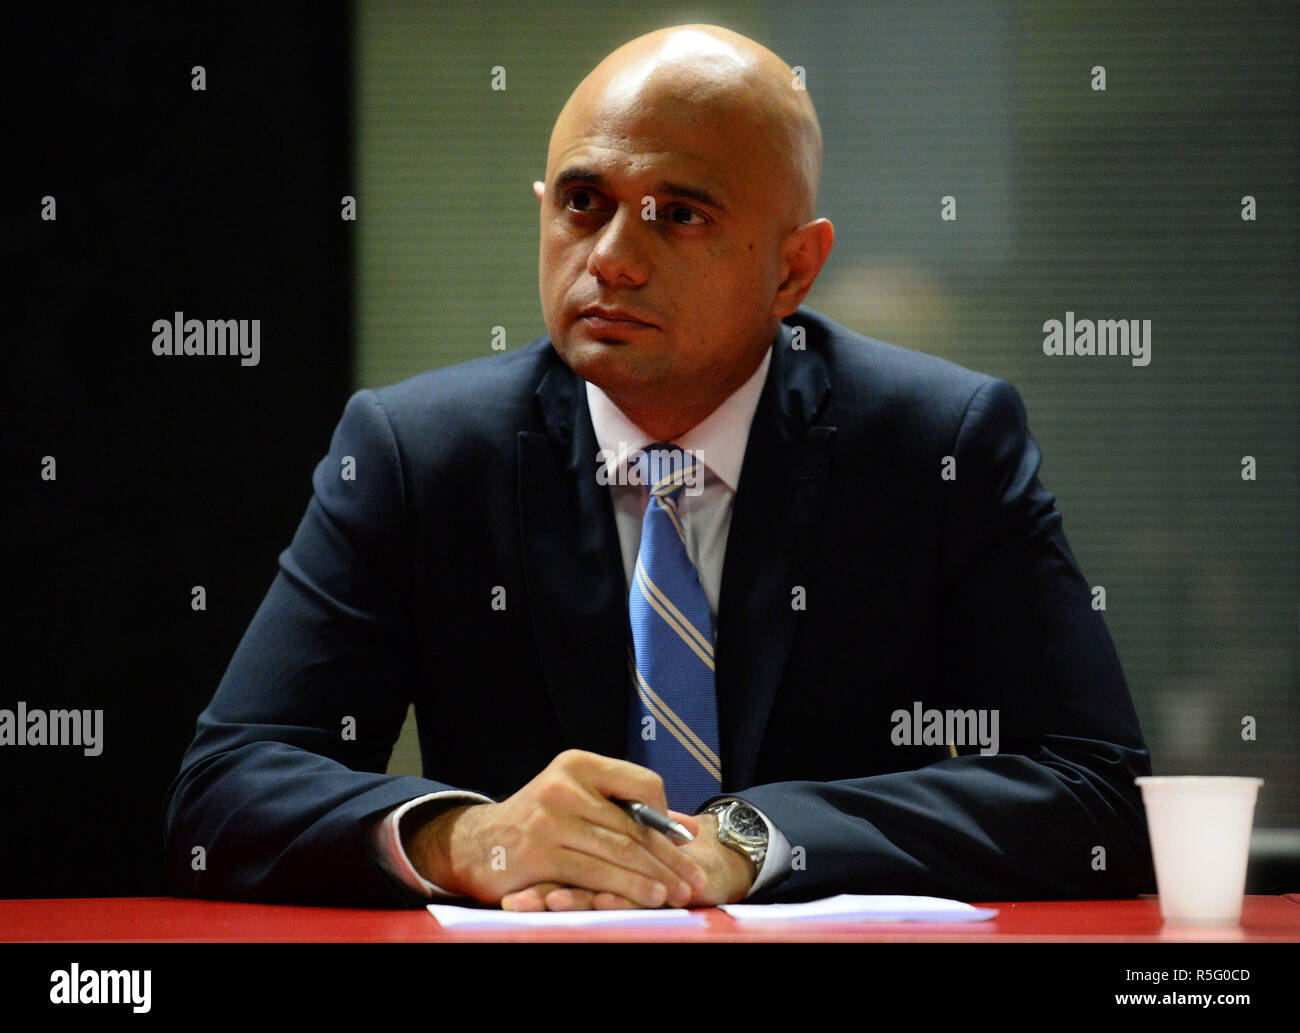 Home Secretary Sajid Javid during a round table discussion on the Prevent anti-terror scheme, at the Chrisp Street Ideas Store in Poplar, London. Stock Photo